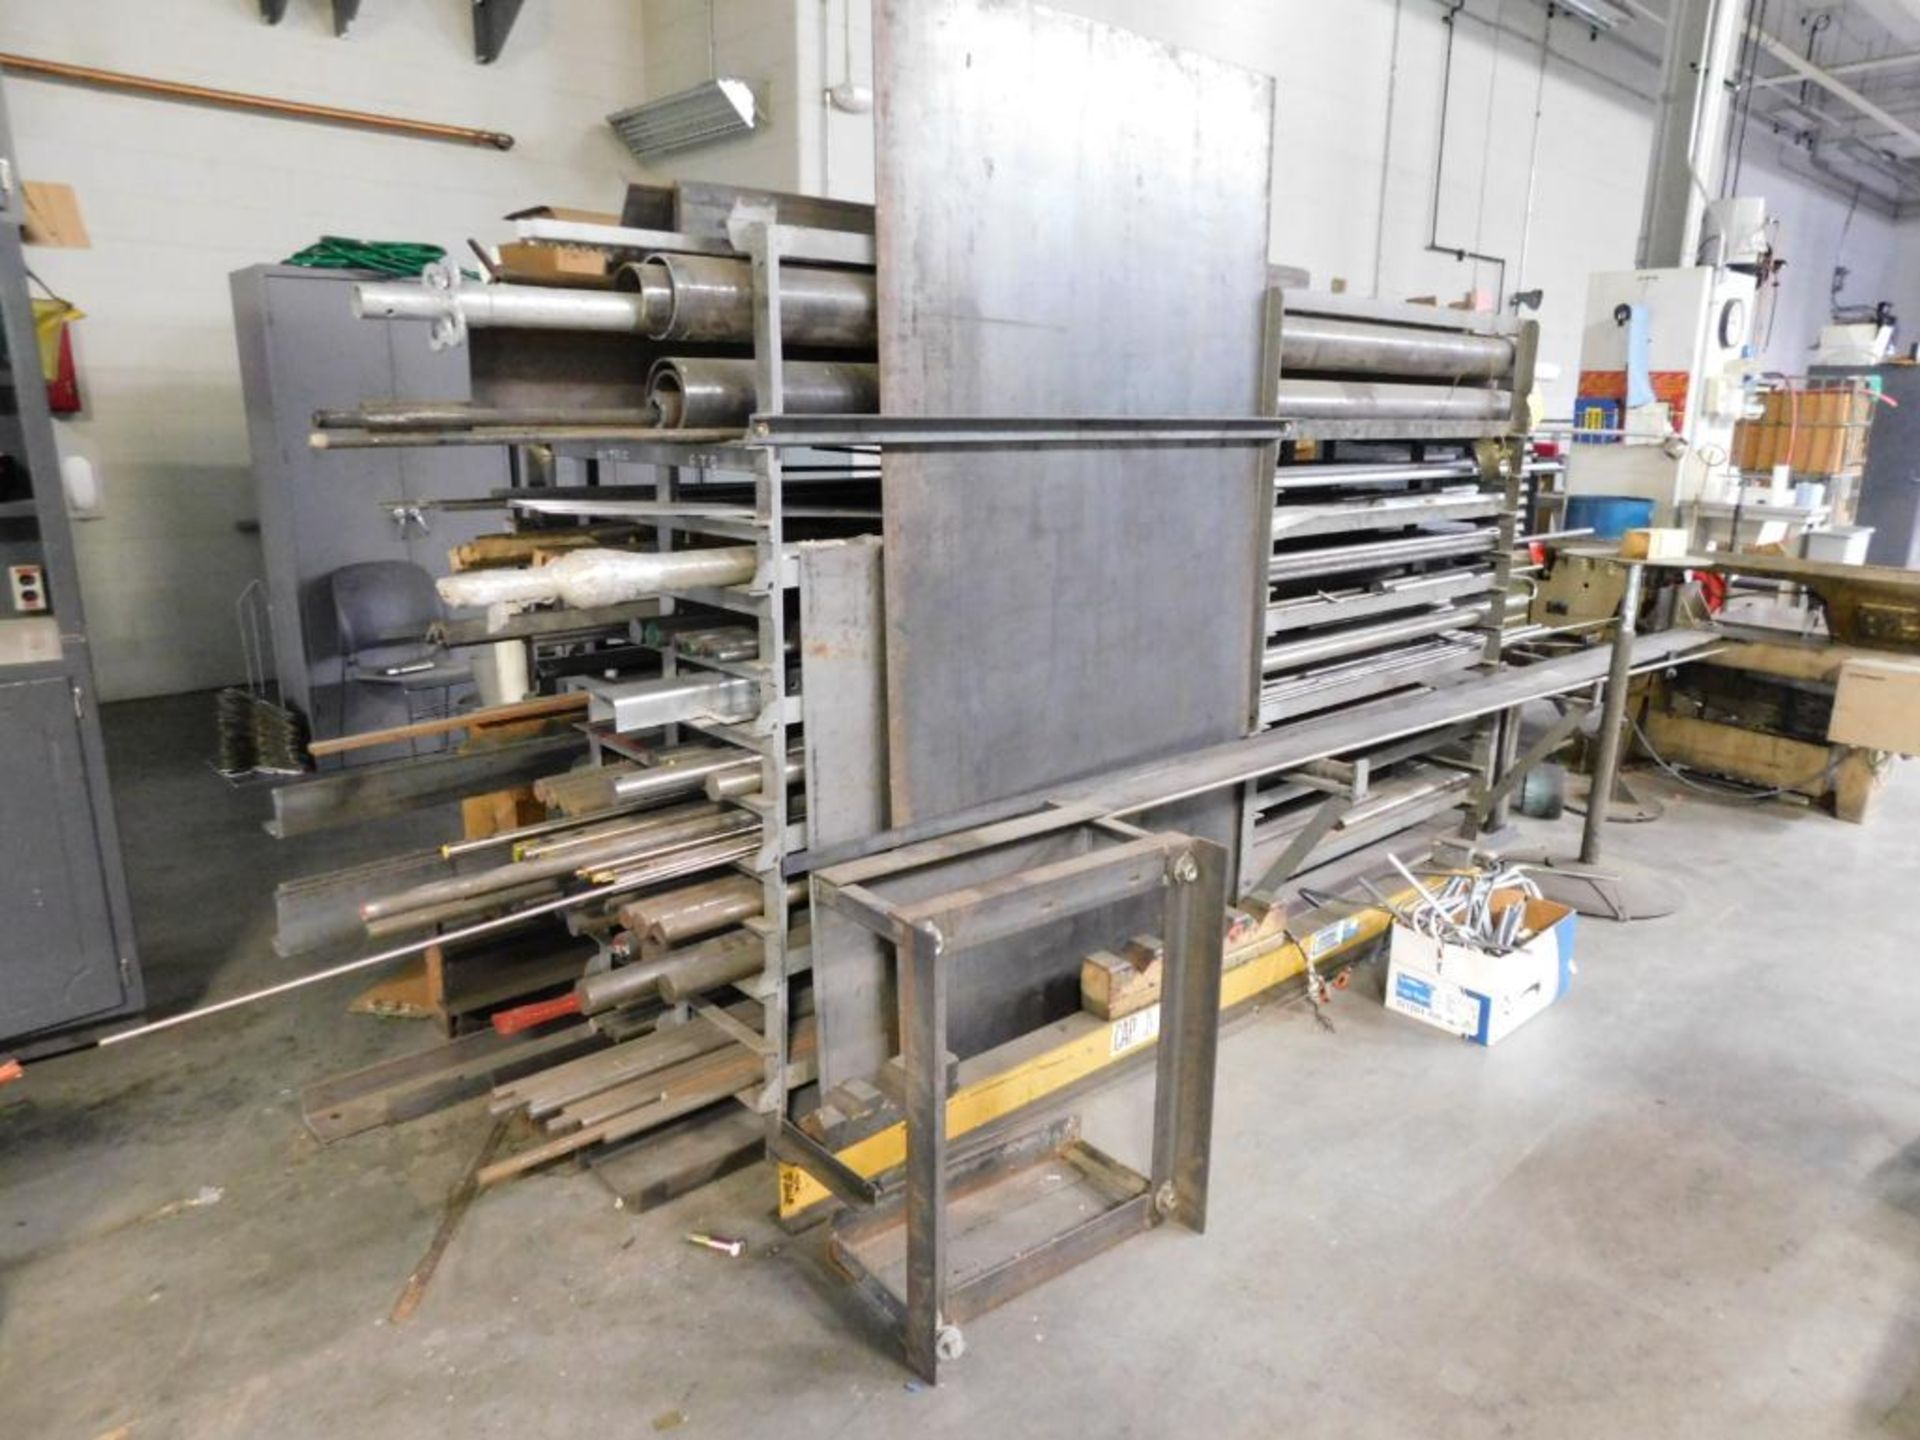 LOT: Material Rack w/Assorted Metal Stock (LOCATION: IN MACHINE SHOP, 2ND FLOOR) - Image 8 of 11